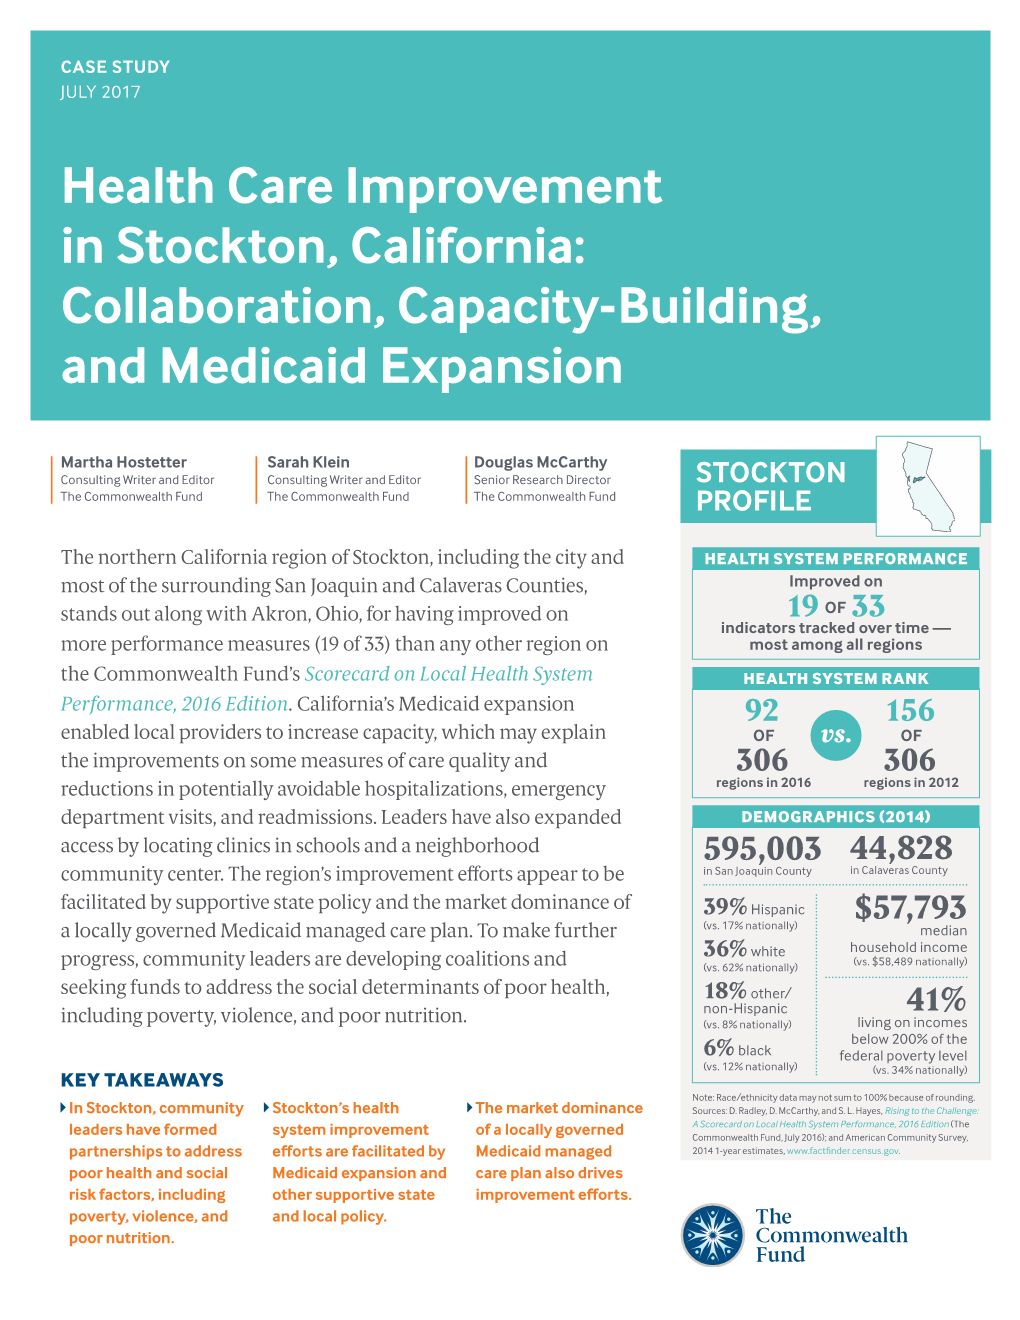 Health Care Improvement in Stockton, California: Collaboration, Capacity-Building, and Medicaid Expansion